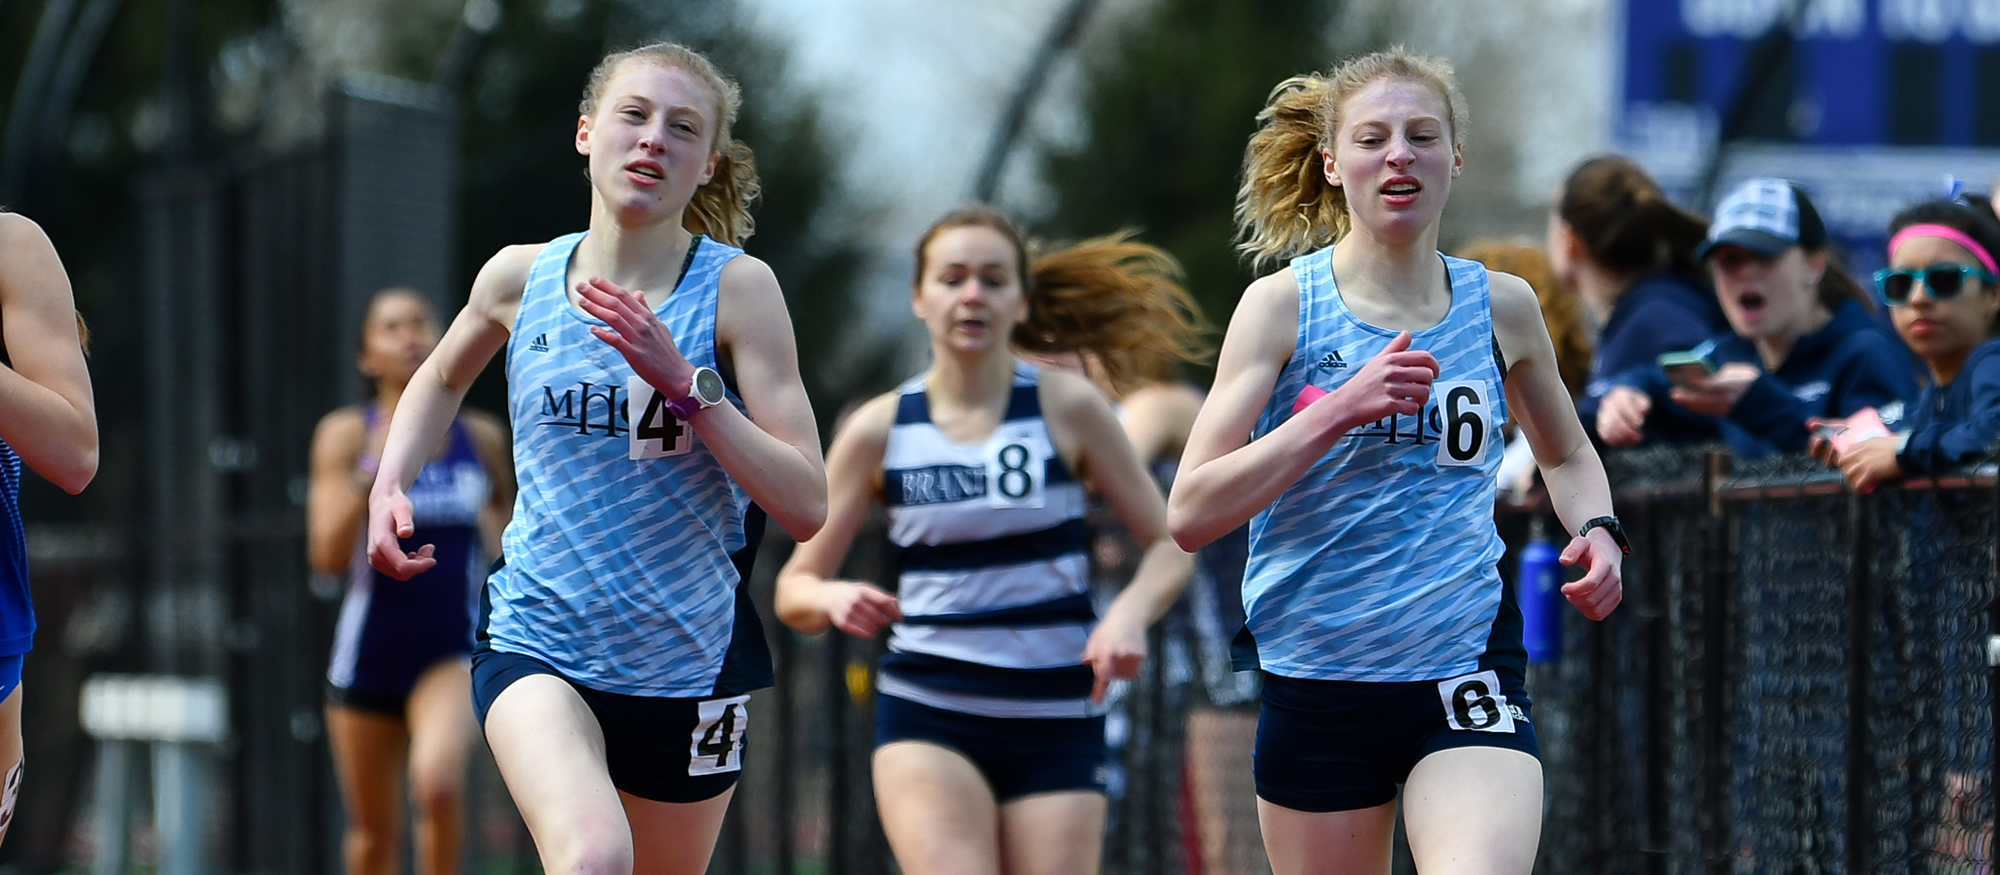 Action photo of Lyons track & field athletes, Hannah and Madeline Rieders.